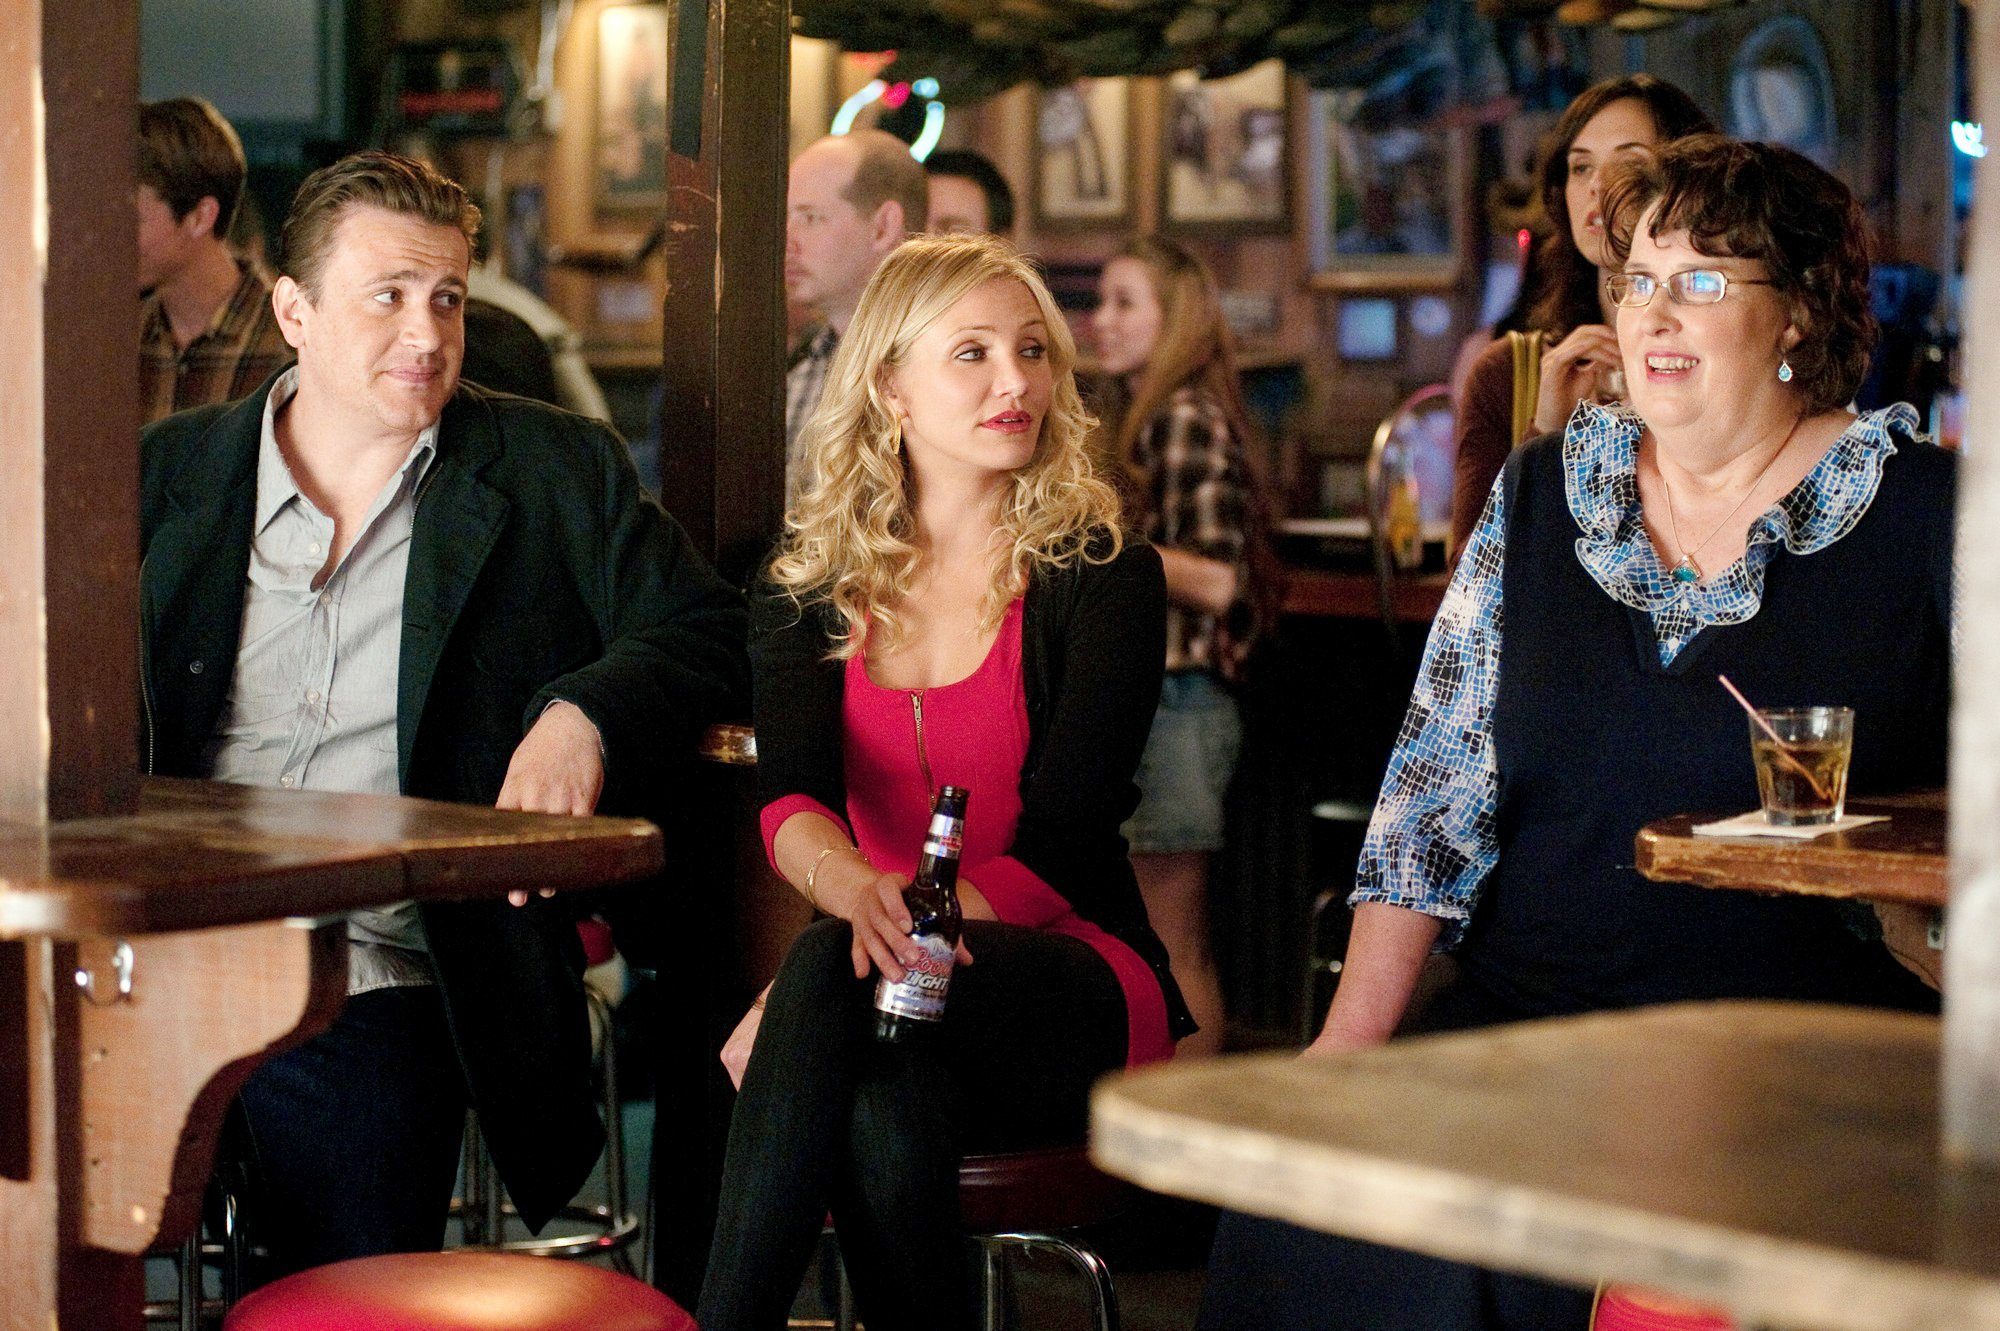 Jason Segel, Cameron Diaz and Phyllis Smith in Columbia Pictures' Bad Teacher (2011)